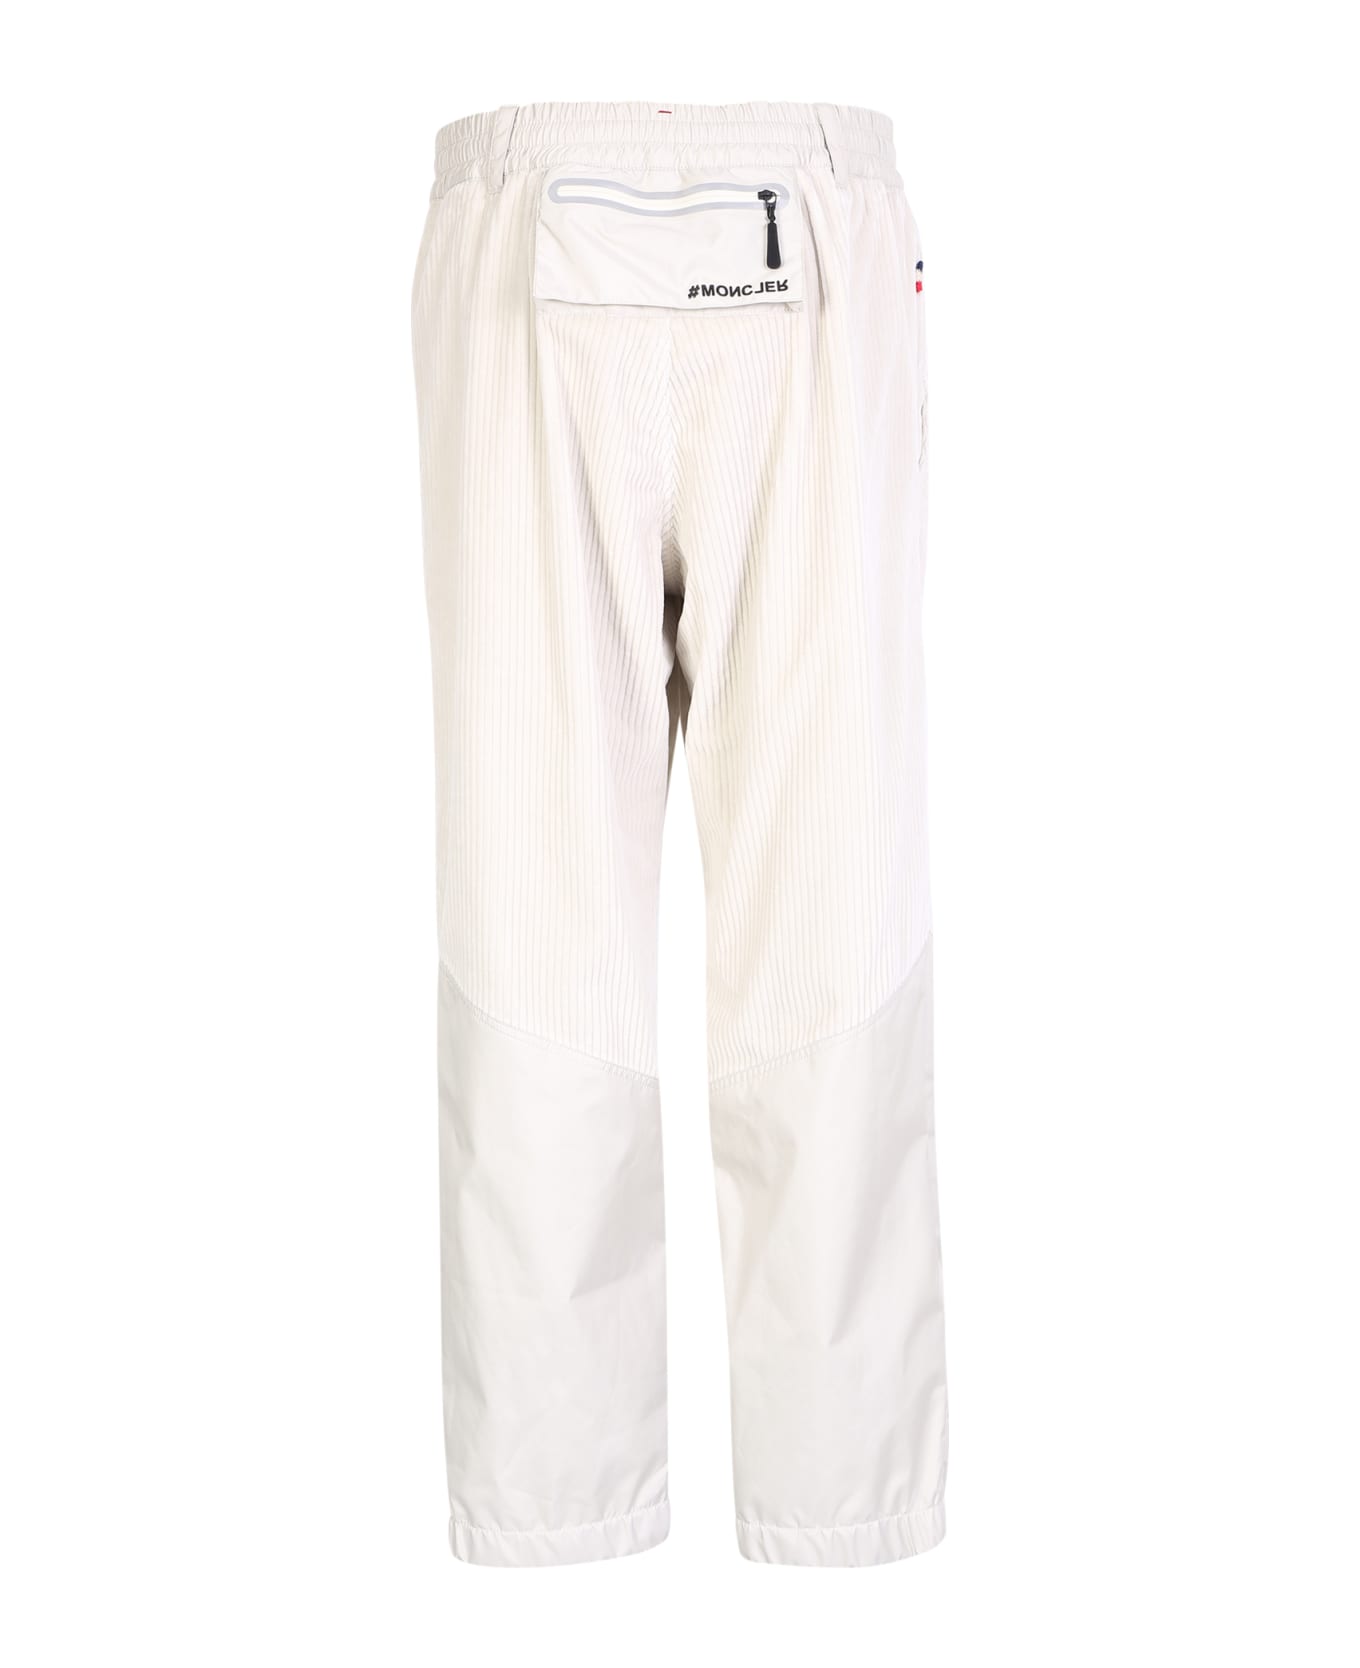 Moncler Grenoble Cream Cotton Blend Trousers - White ボトムス